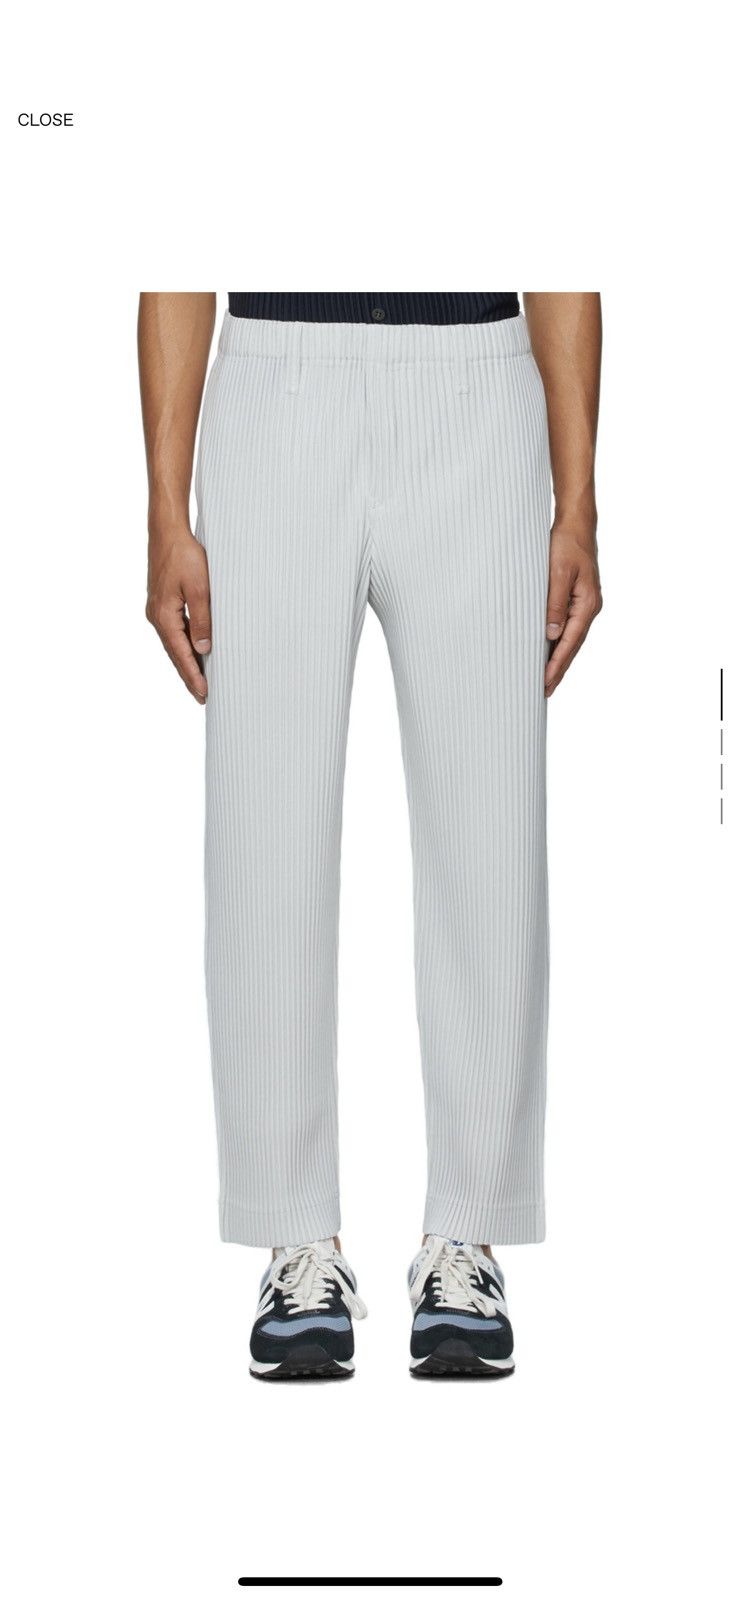 Issey Miyake Issey Miyake Pleated Trousers Size US 30 / EU 46 - 1 Preview